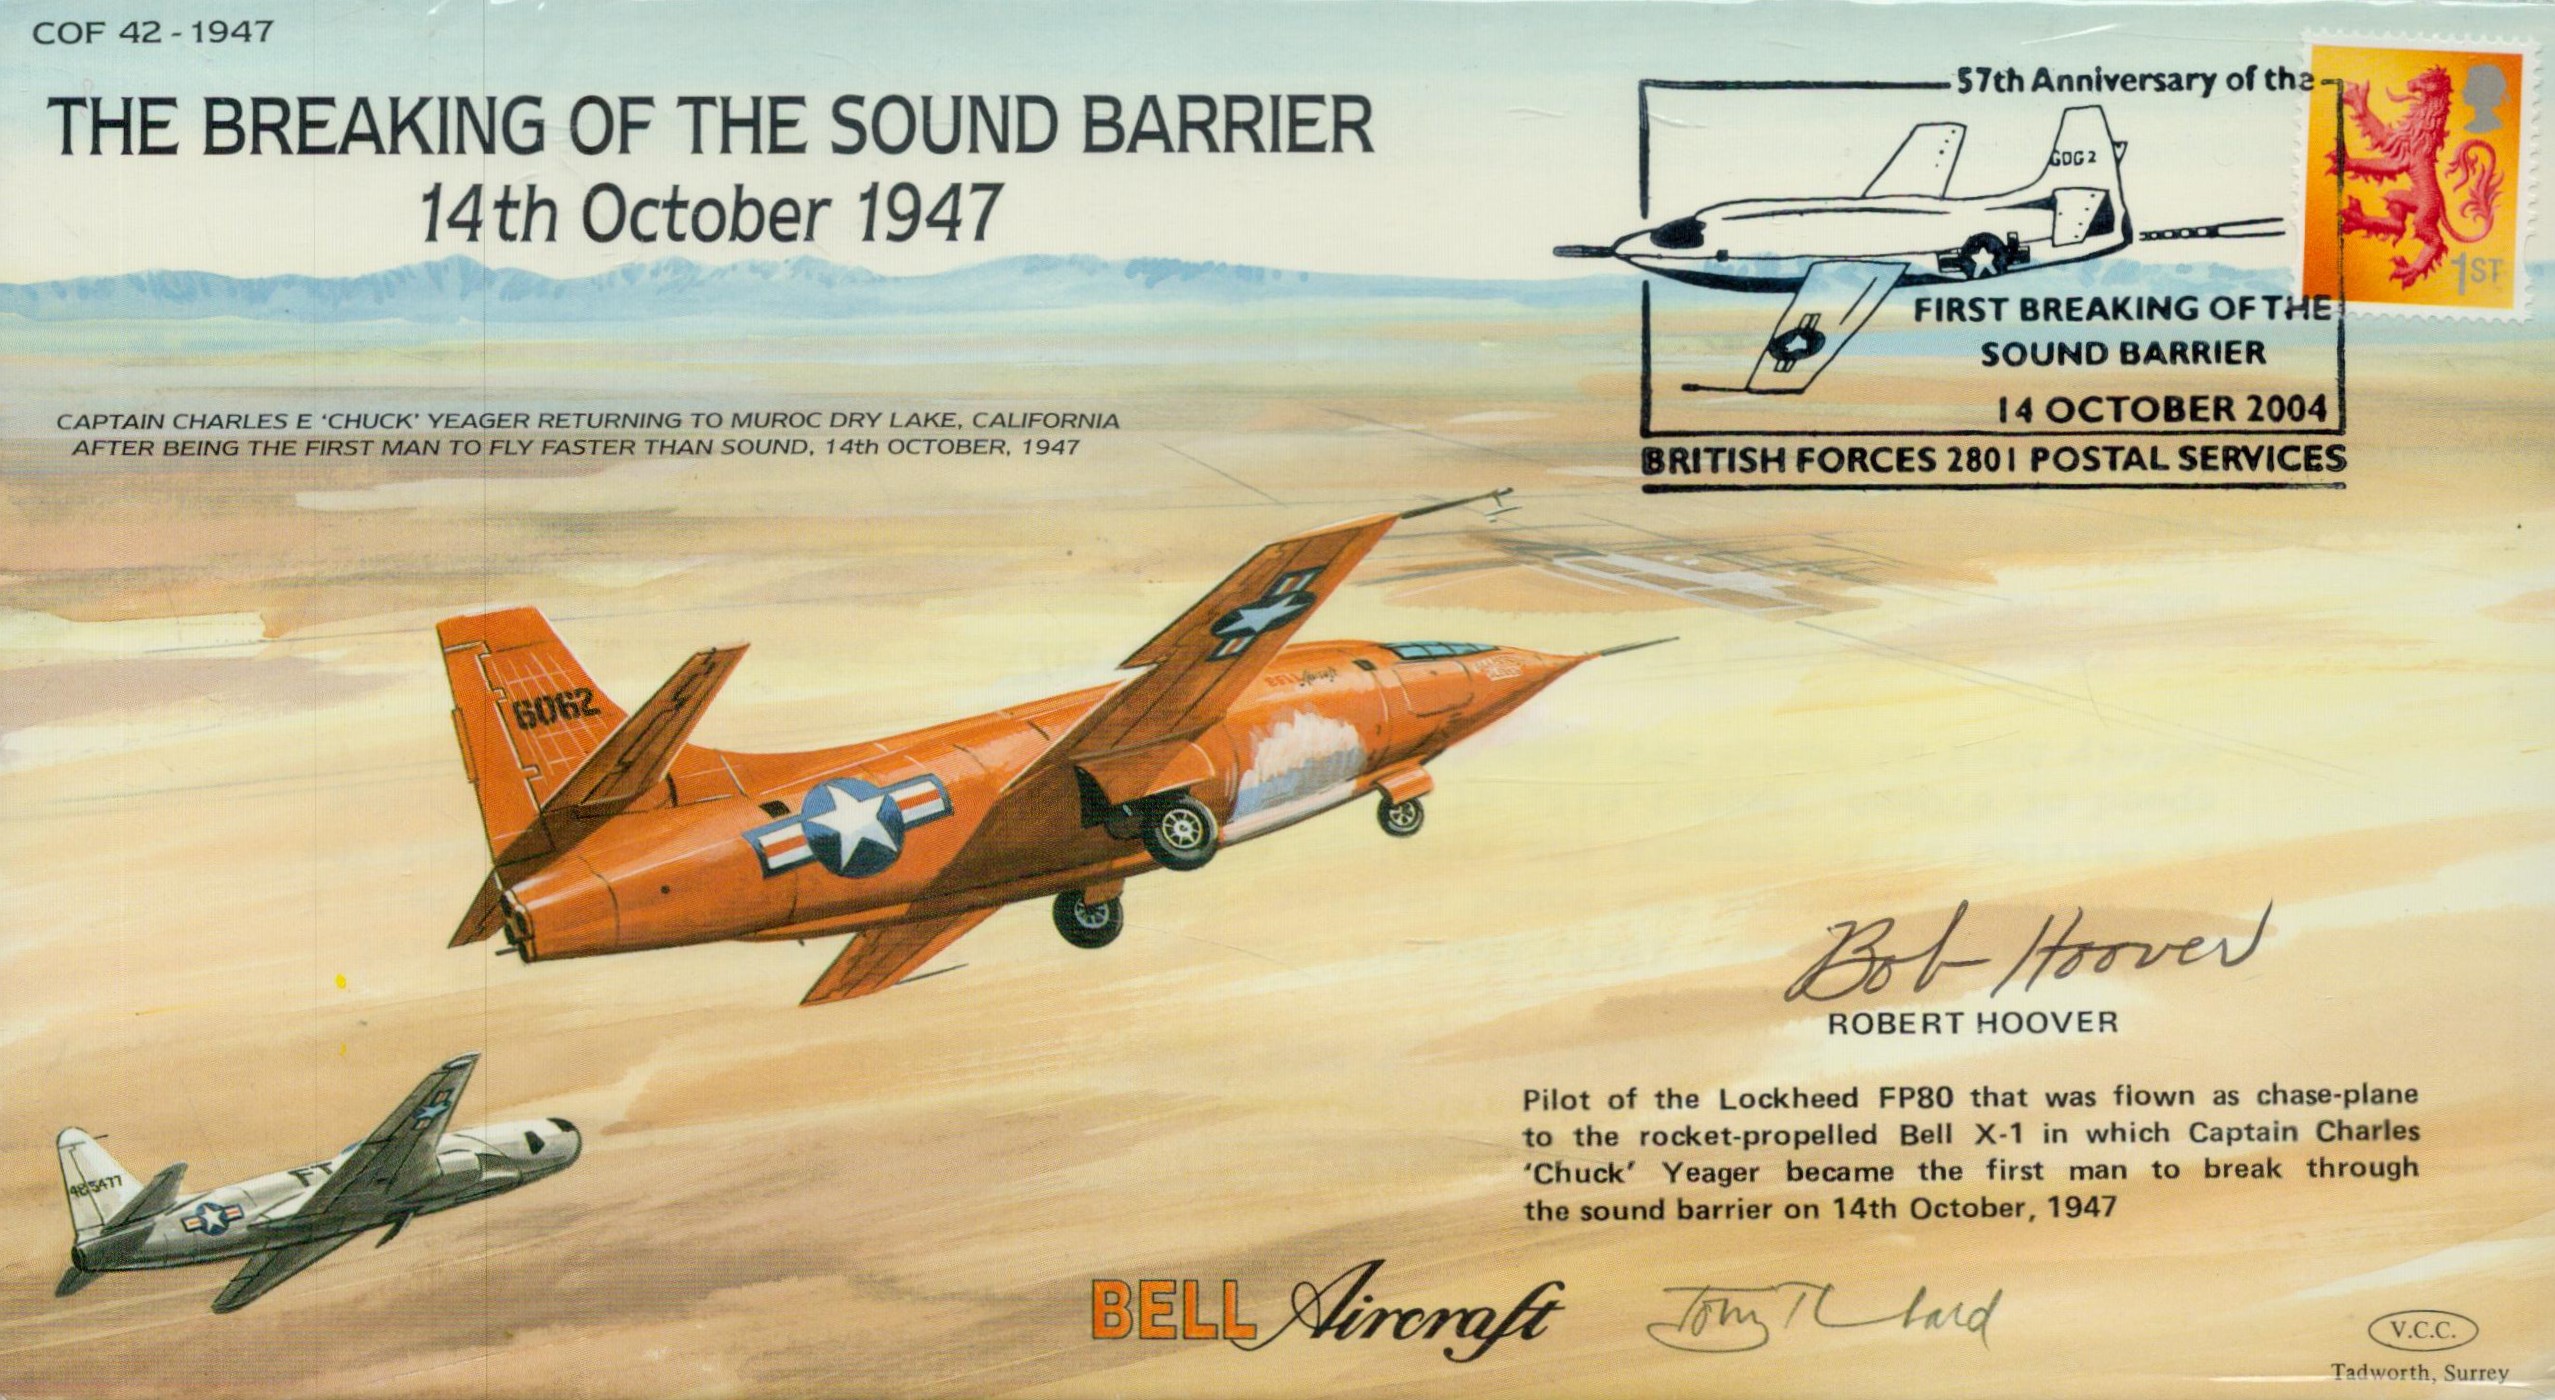 Aviation legend Robert Hoover Signed The Breaking Of The Sound Barrier Cover , he flew the chase